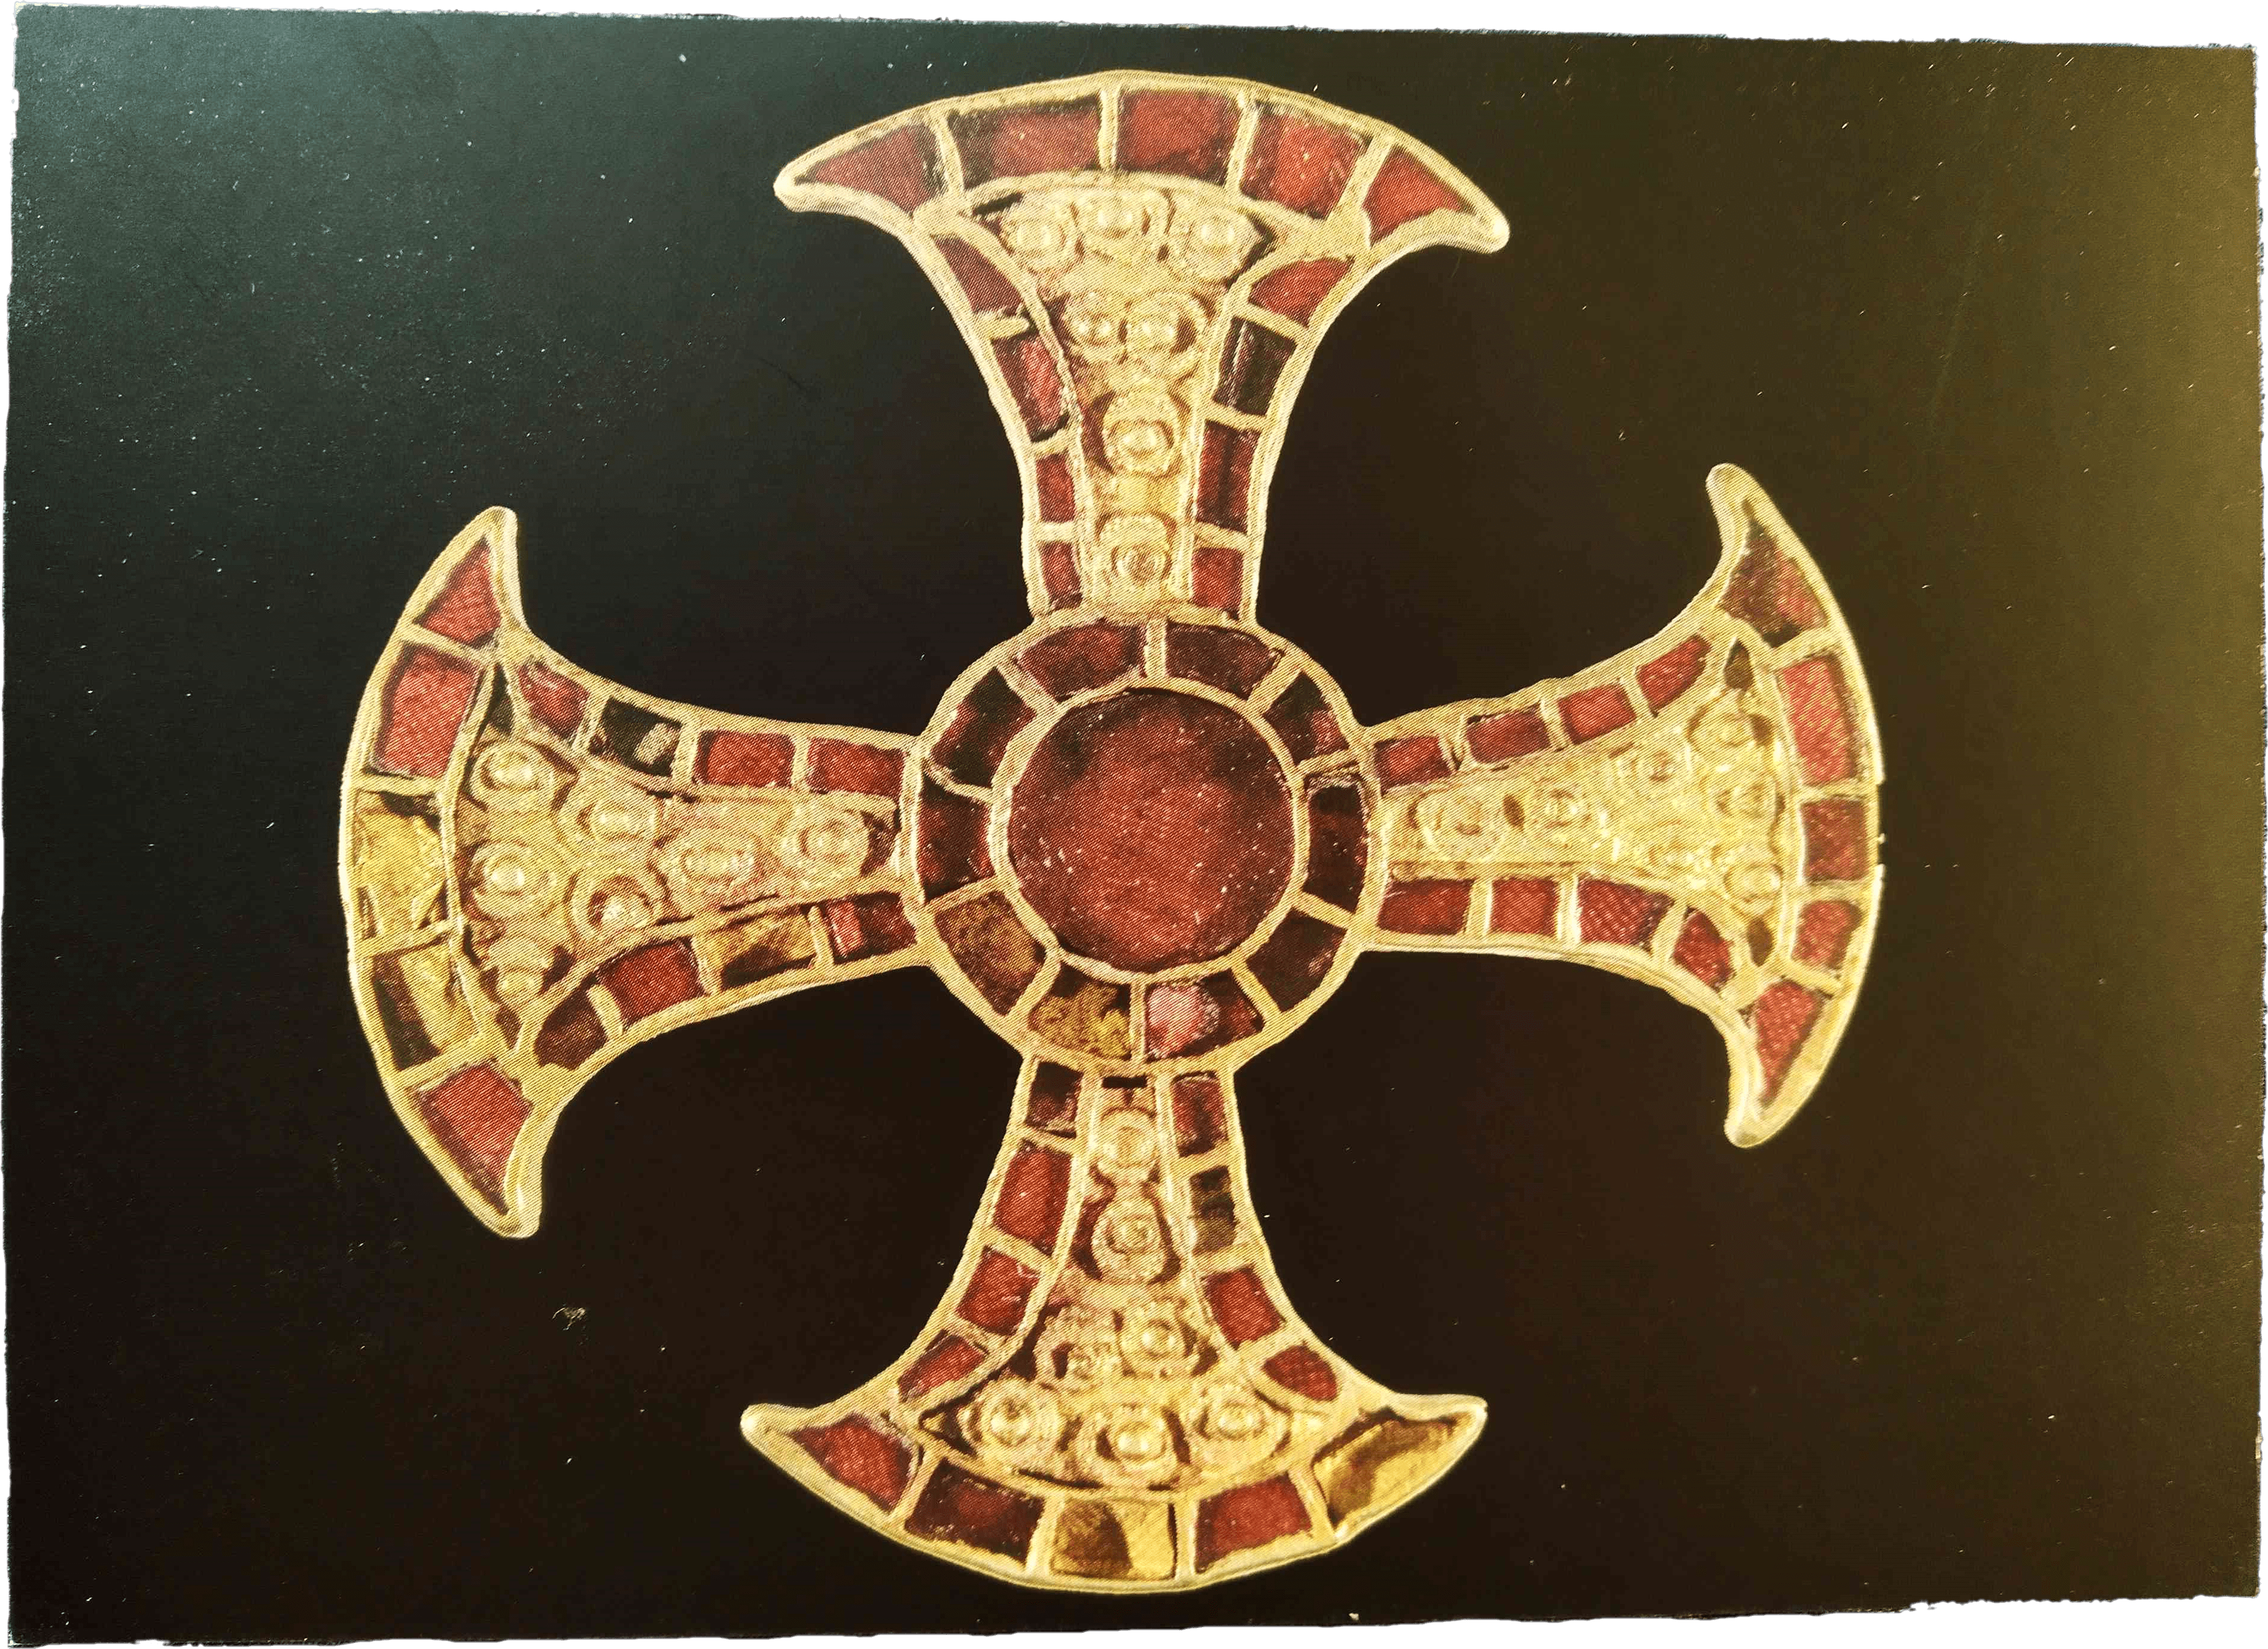 A photograph of an anglo saxon cross